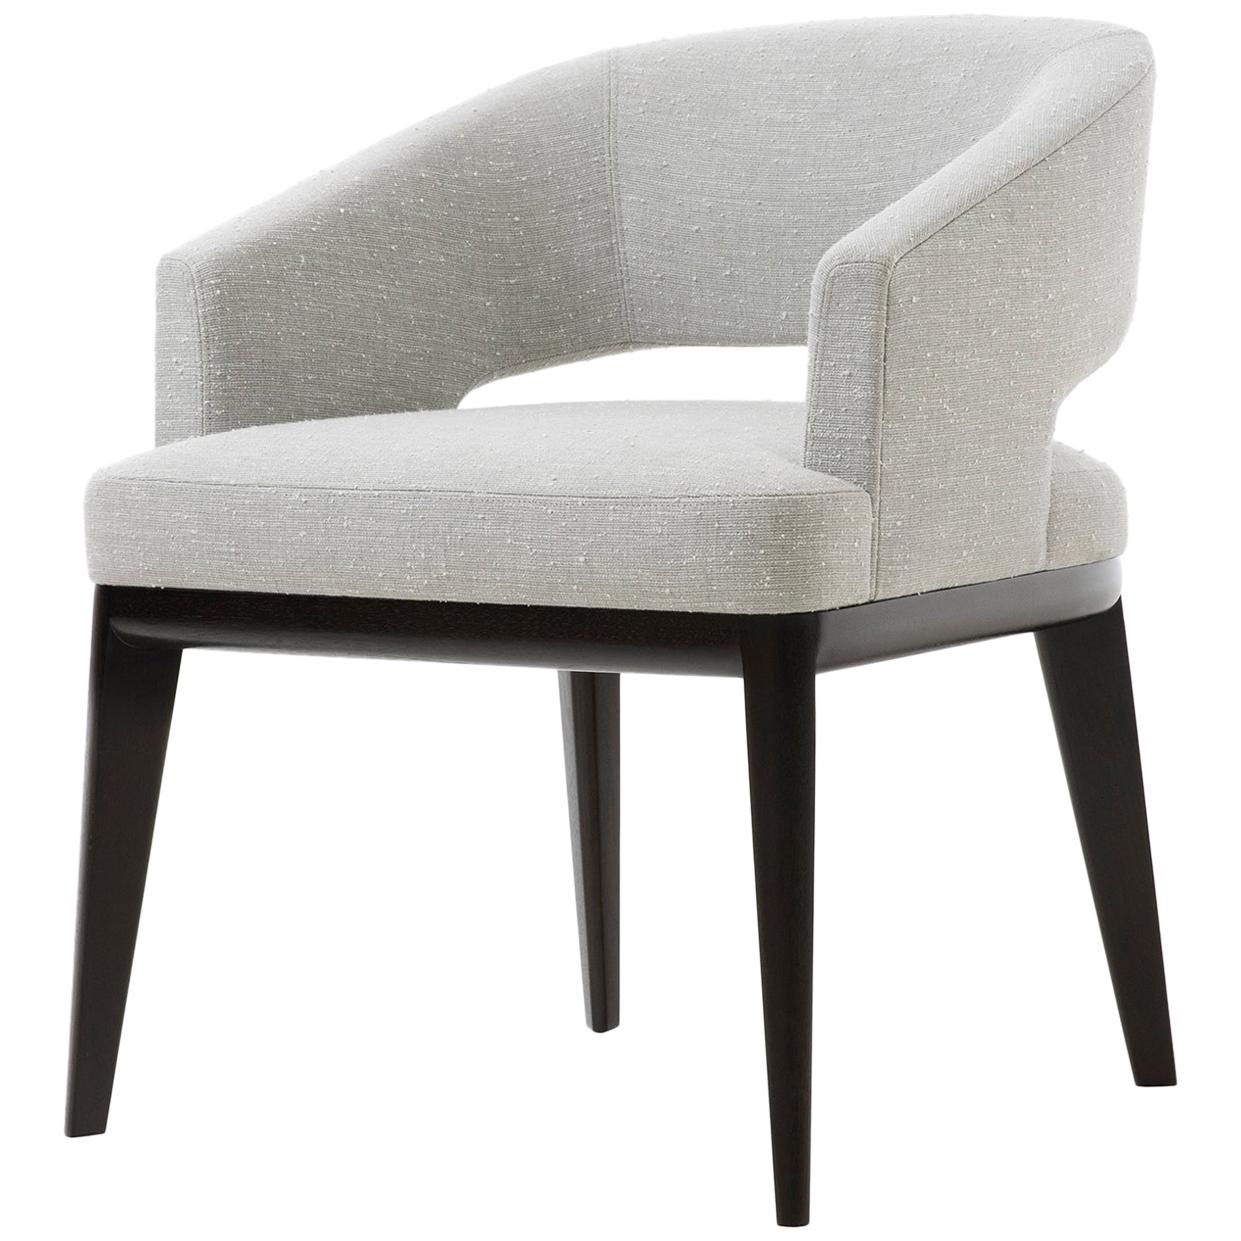 HOLLY HUNT Minerva Dining Chair in Walnut Black Magic and Cloud Upholstery